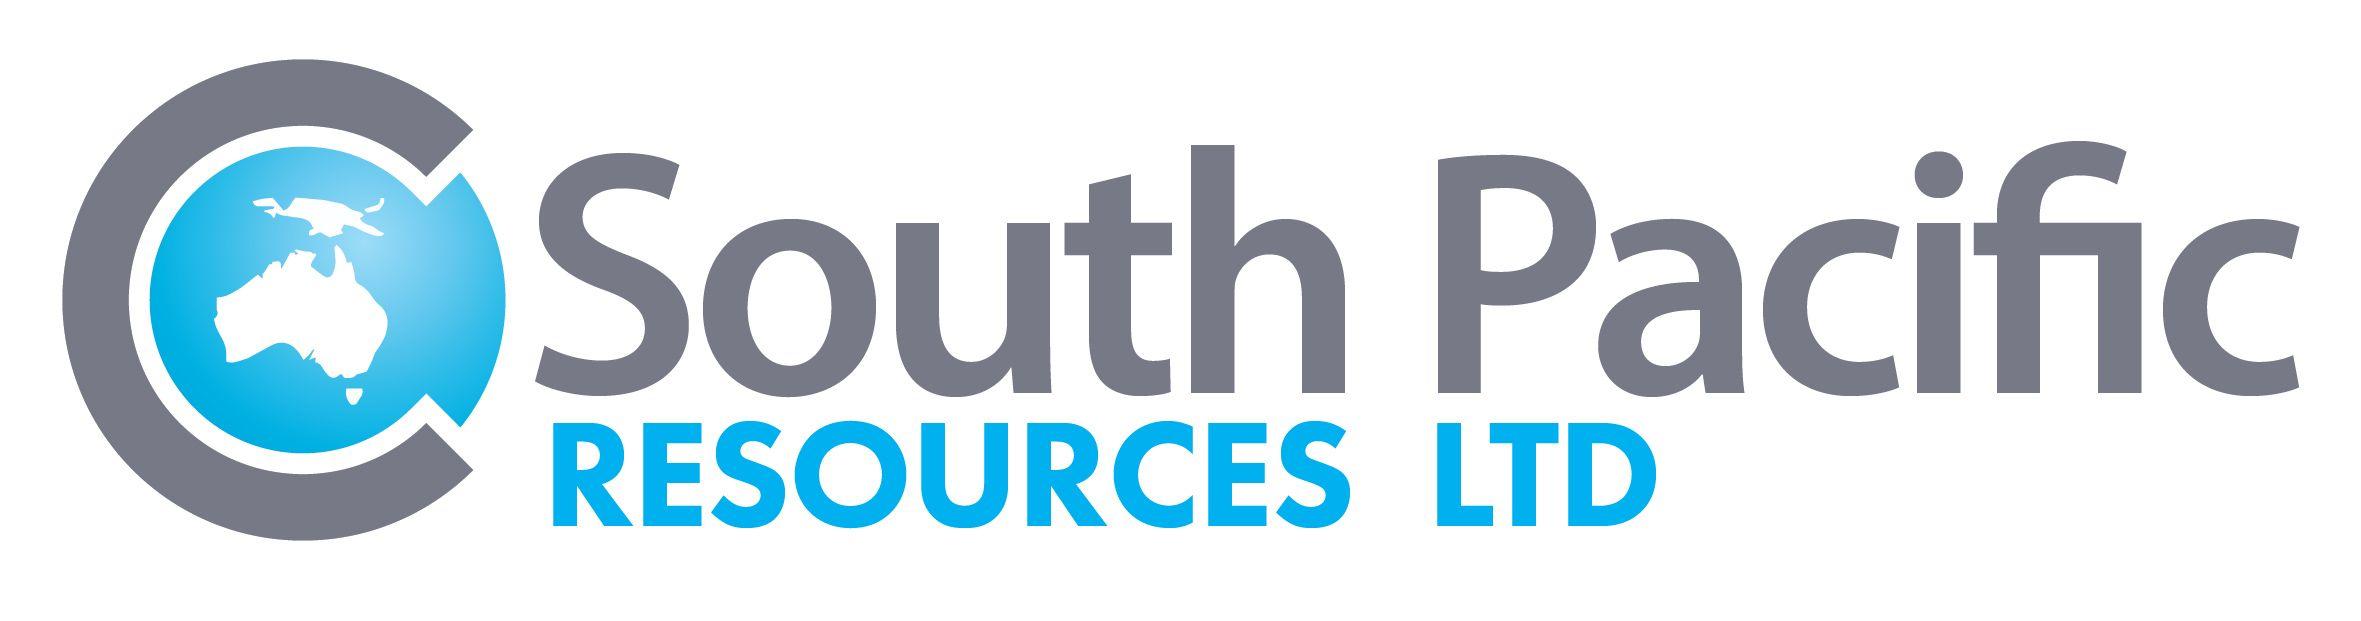 South Pacific Logo - South Pacific Resources. South Pacific Resources